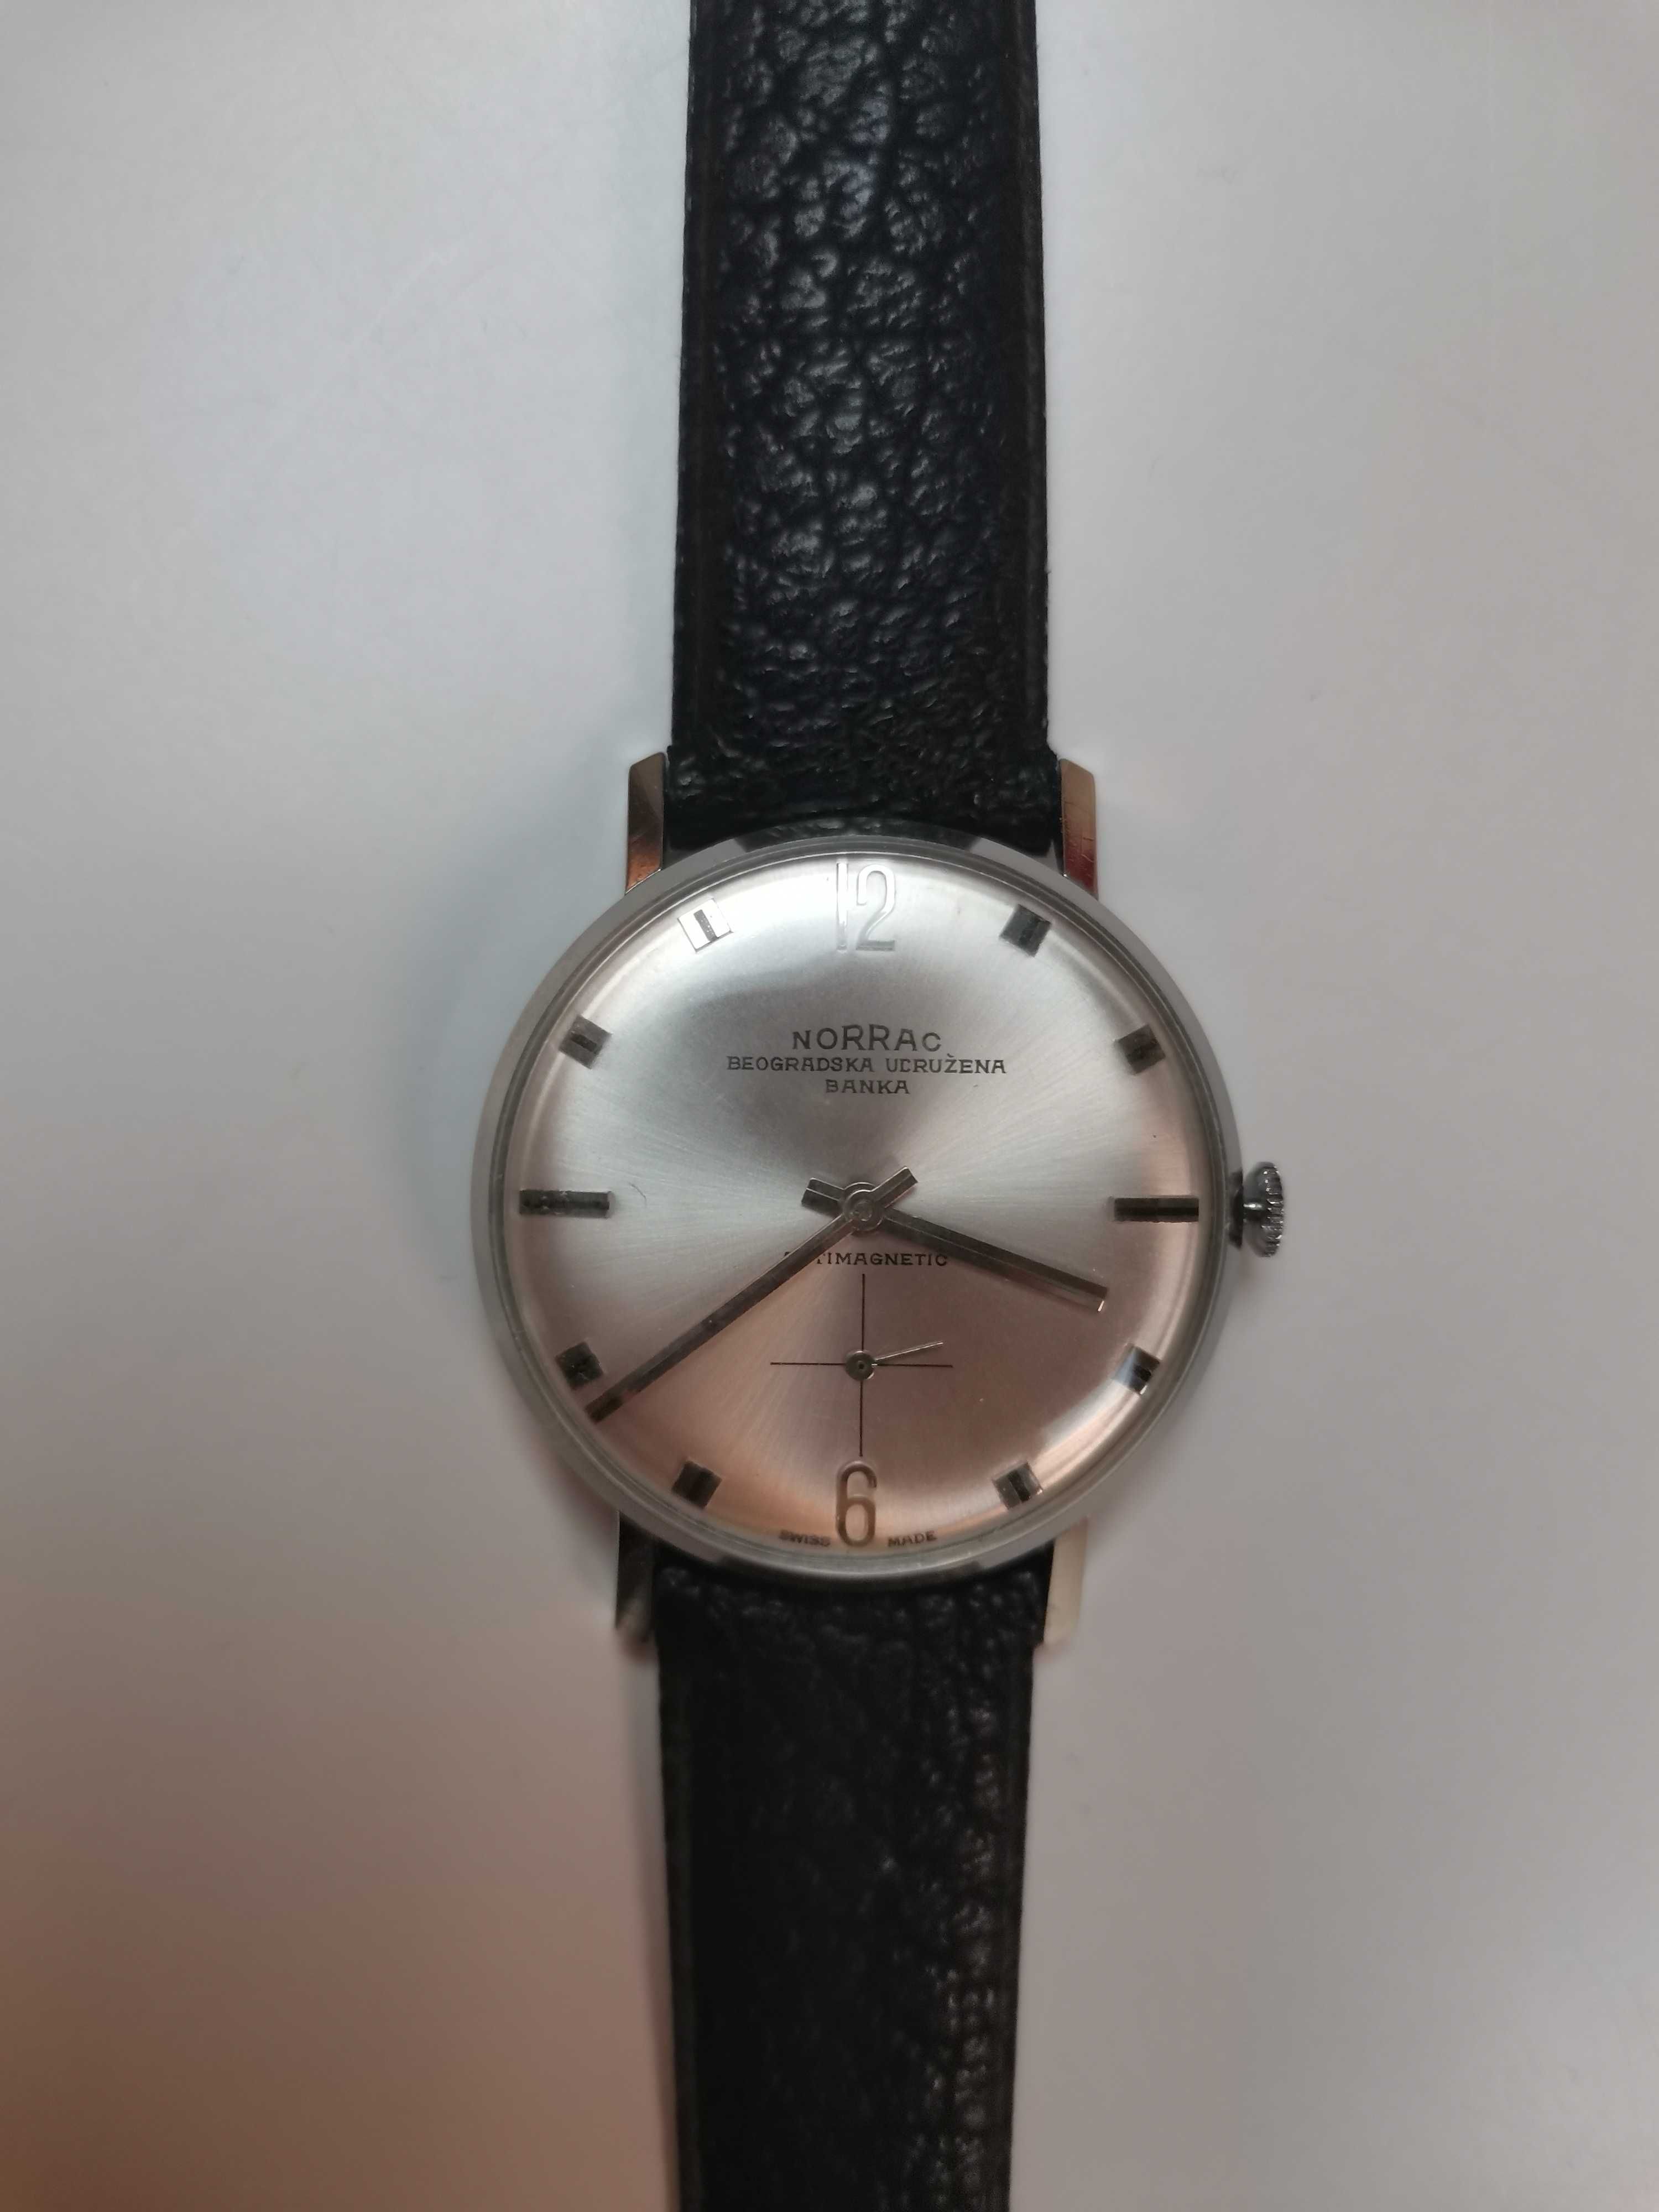 Ceas mecanic vintage by Norrac, Swiss made, 1970